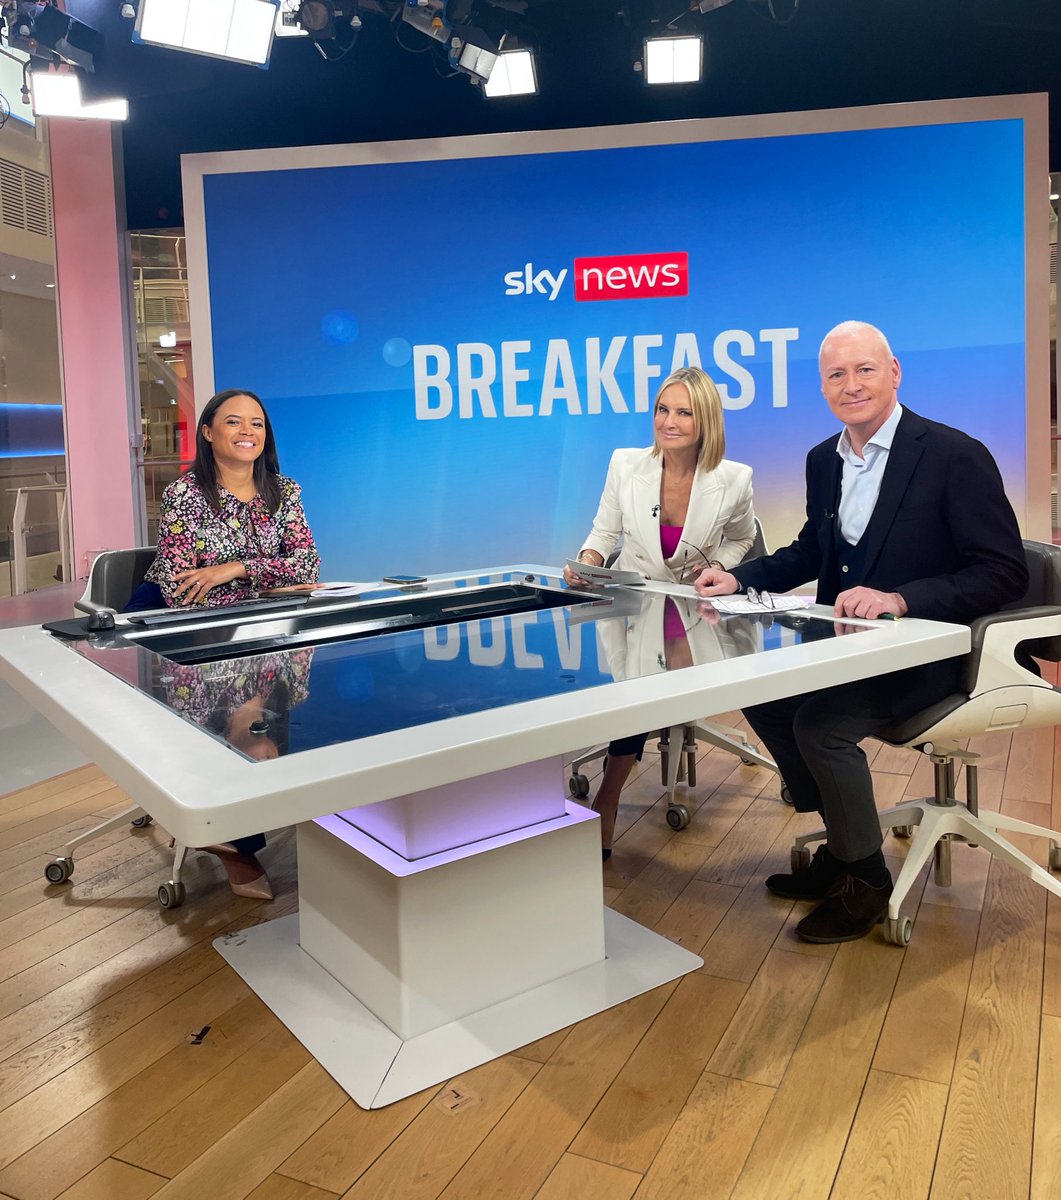 Thanks for coming in to @SkyNews @JimWhite good luck with the book 📚 it was great to see you my friend 😀 - @LeahBoleto Sky News Breakfast #TransferDeadlineDay Saturday chat